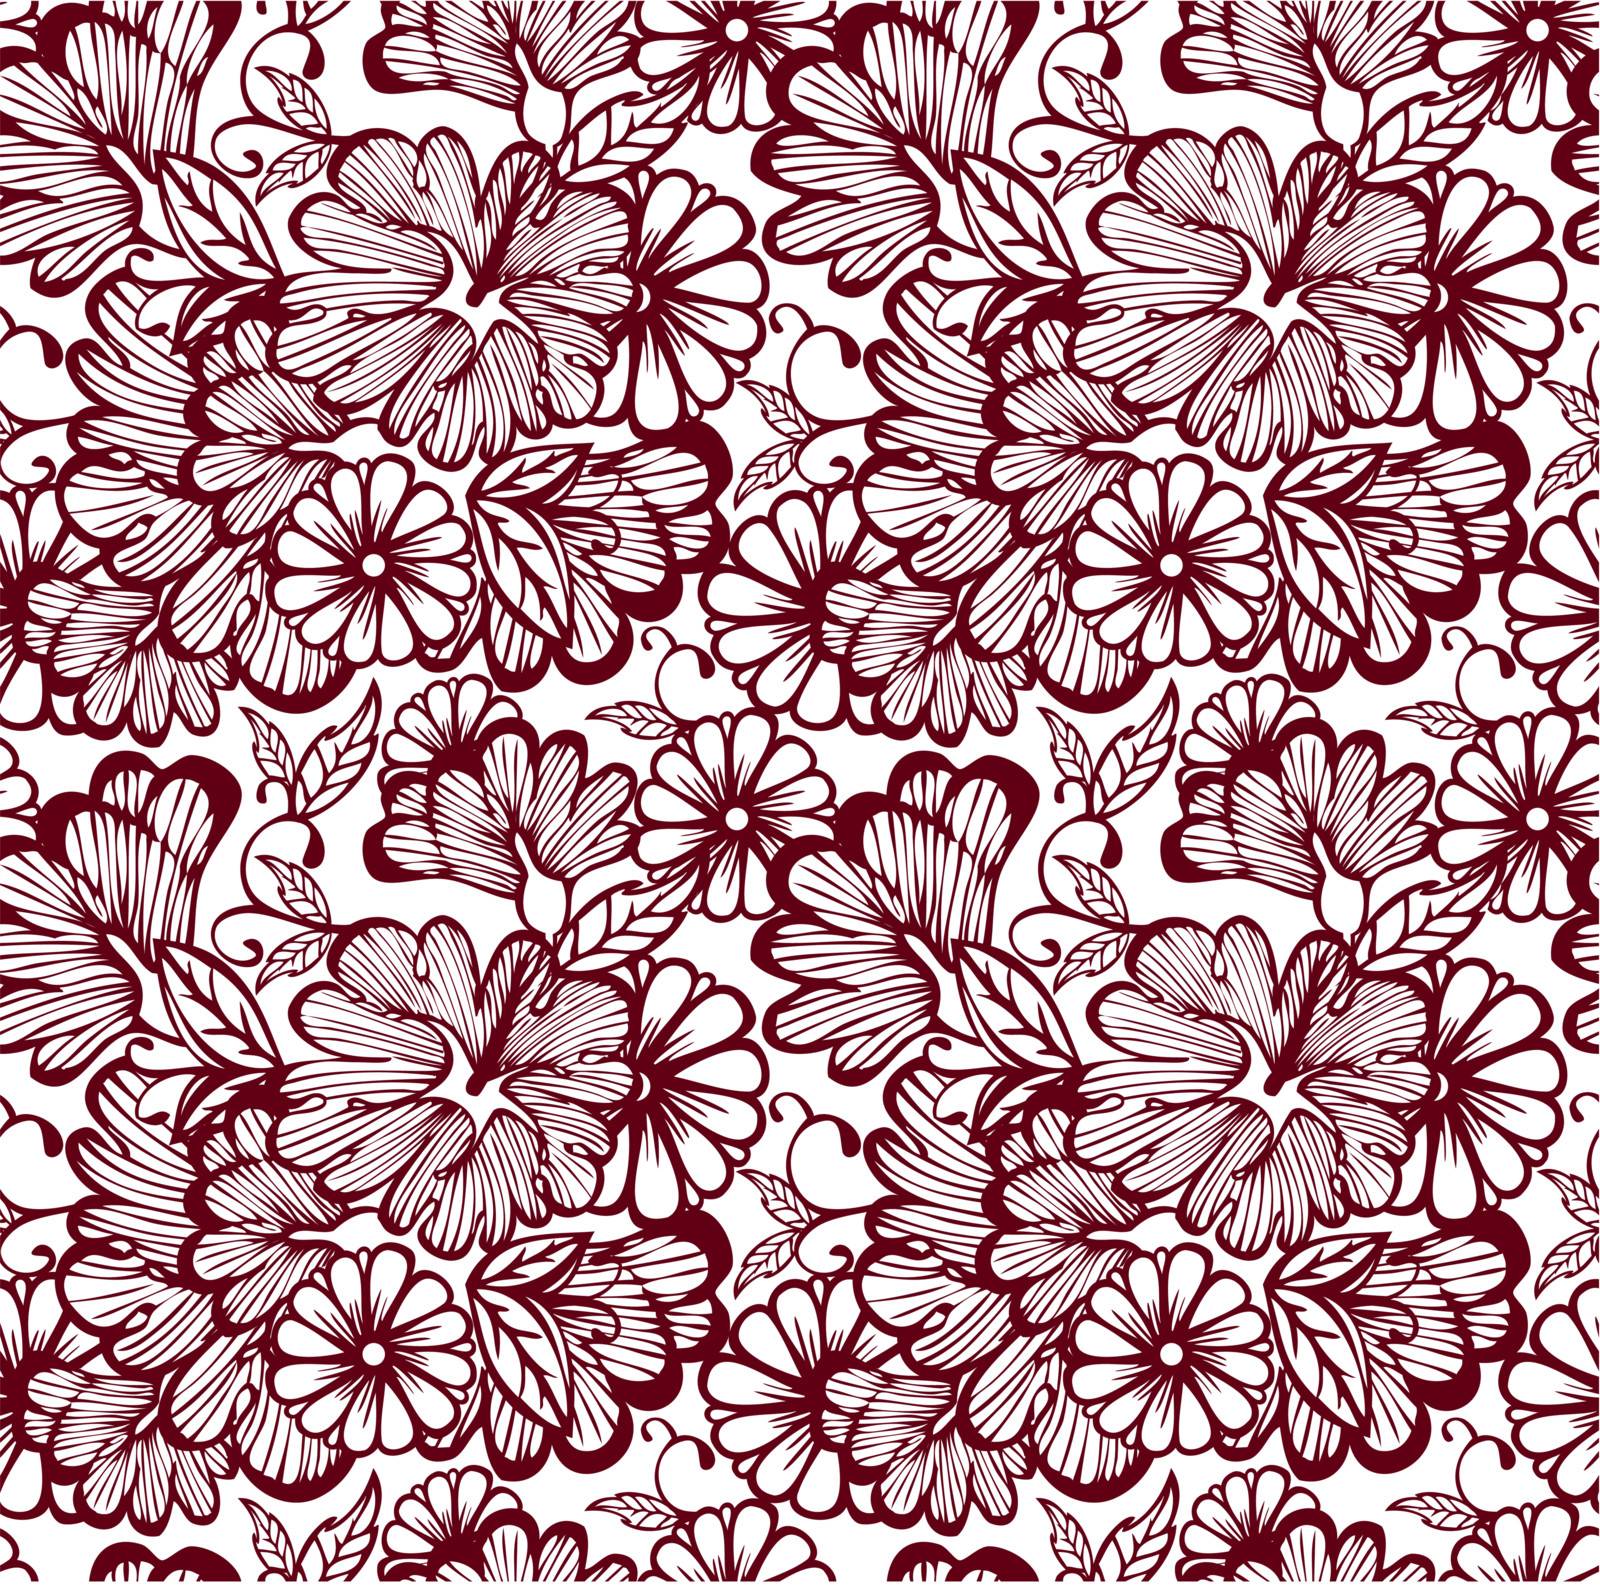 Vector illustration of Damask pattern by SonneOn